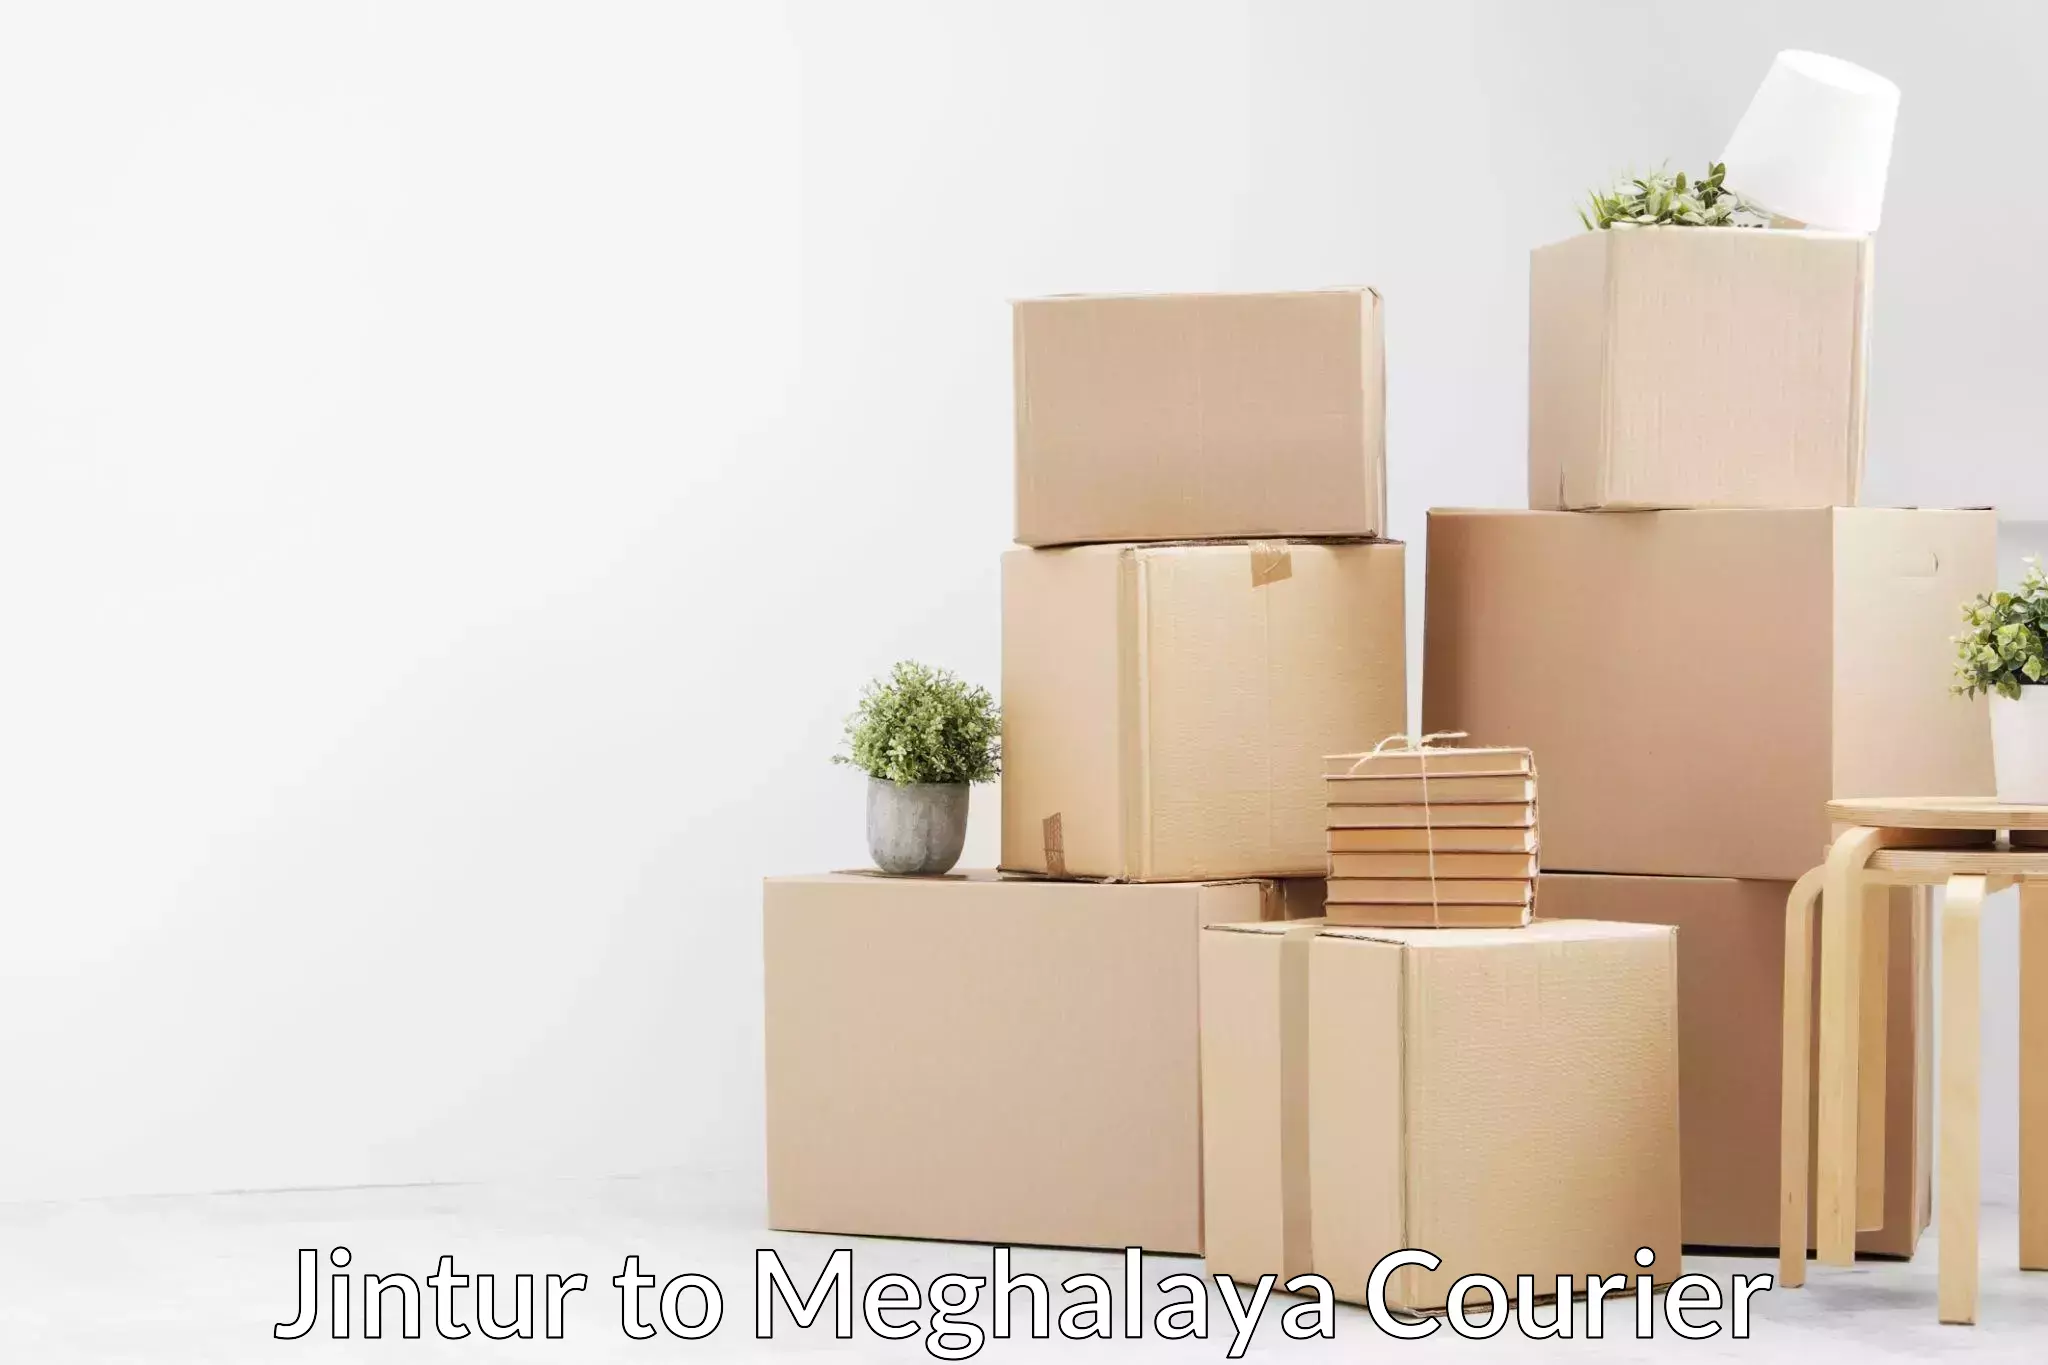 Quality relocation services Jintur to South Garo Hills